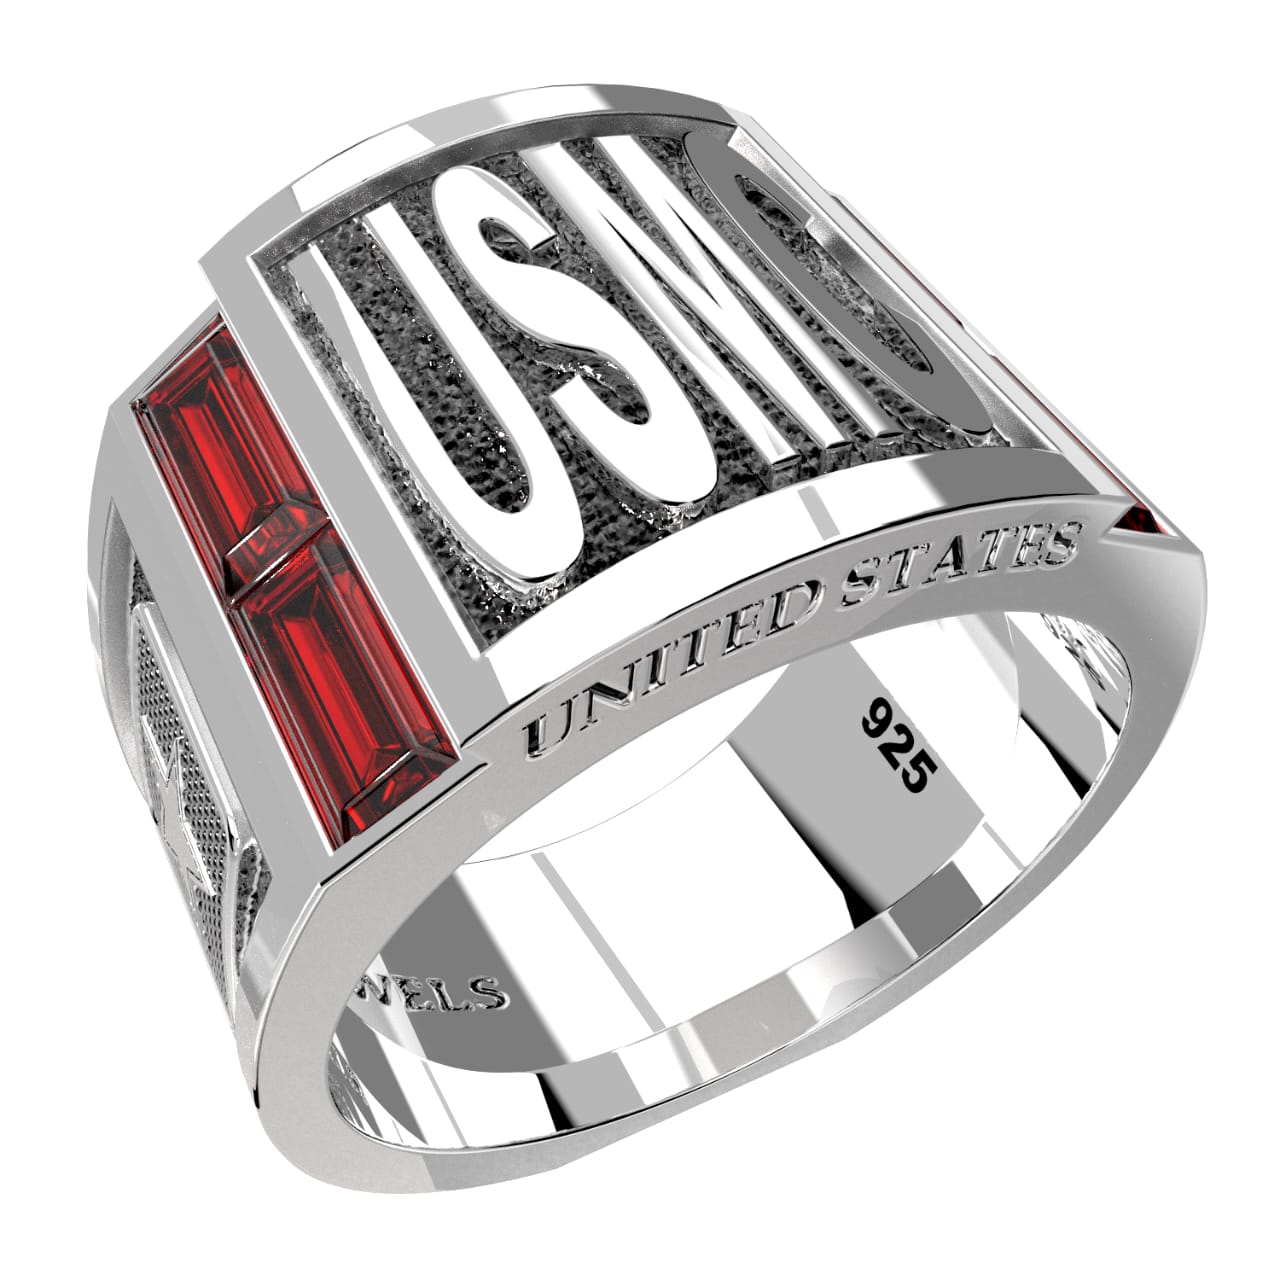 Men's 925 Sterling Silver Synthetic Rubies US Marine Corps USMC Ring